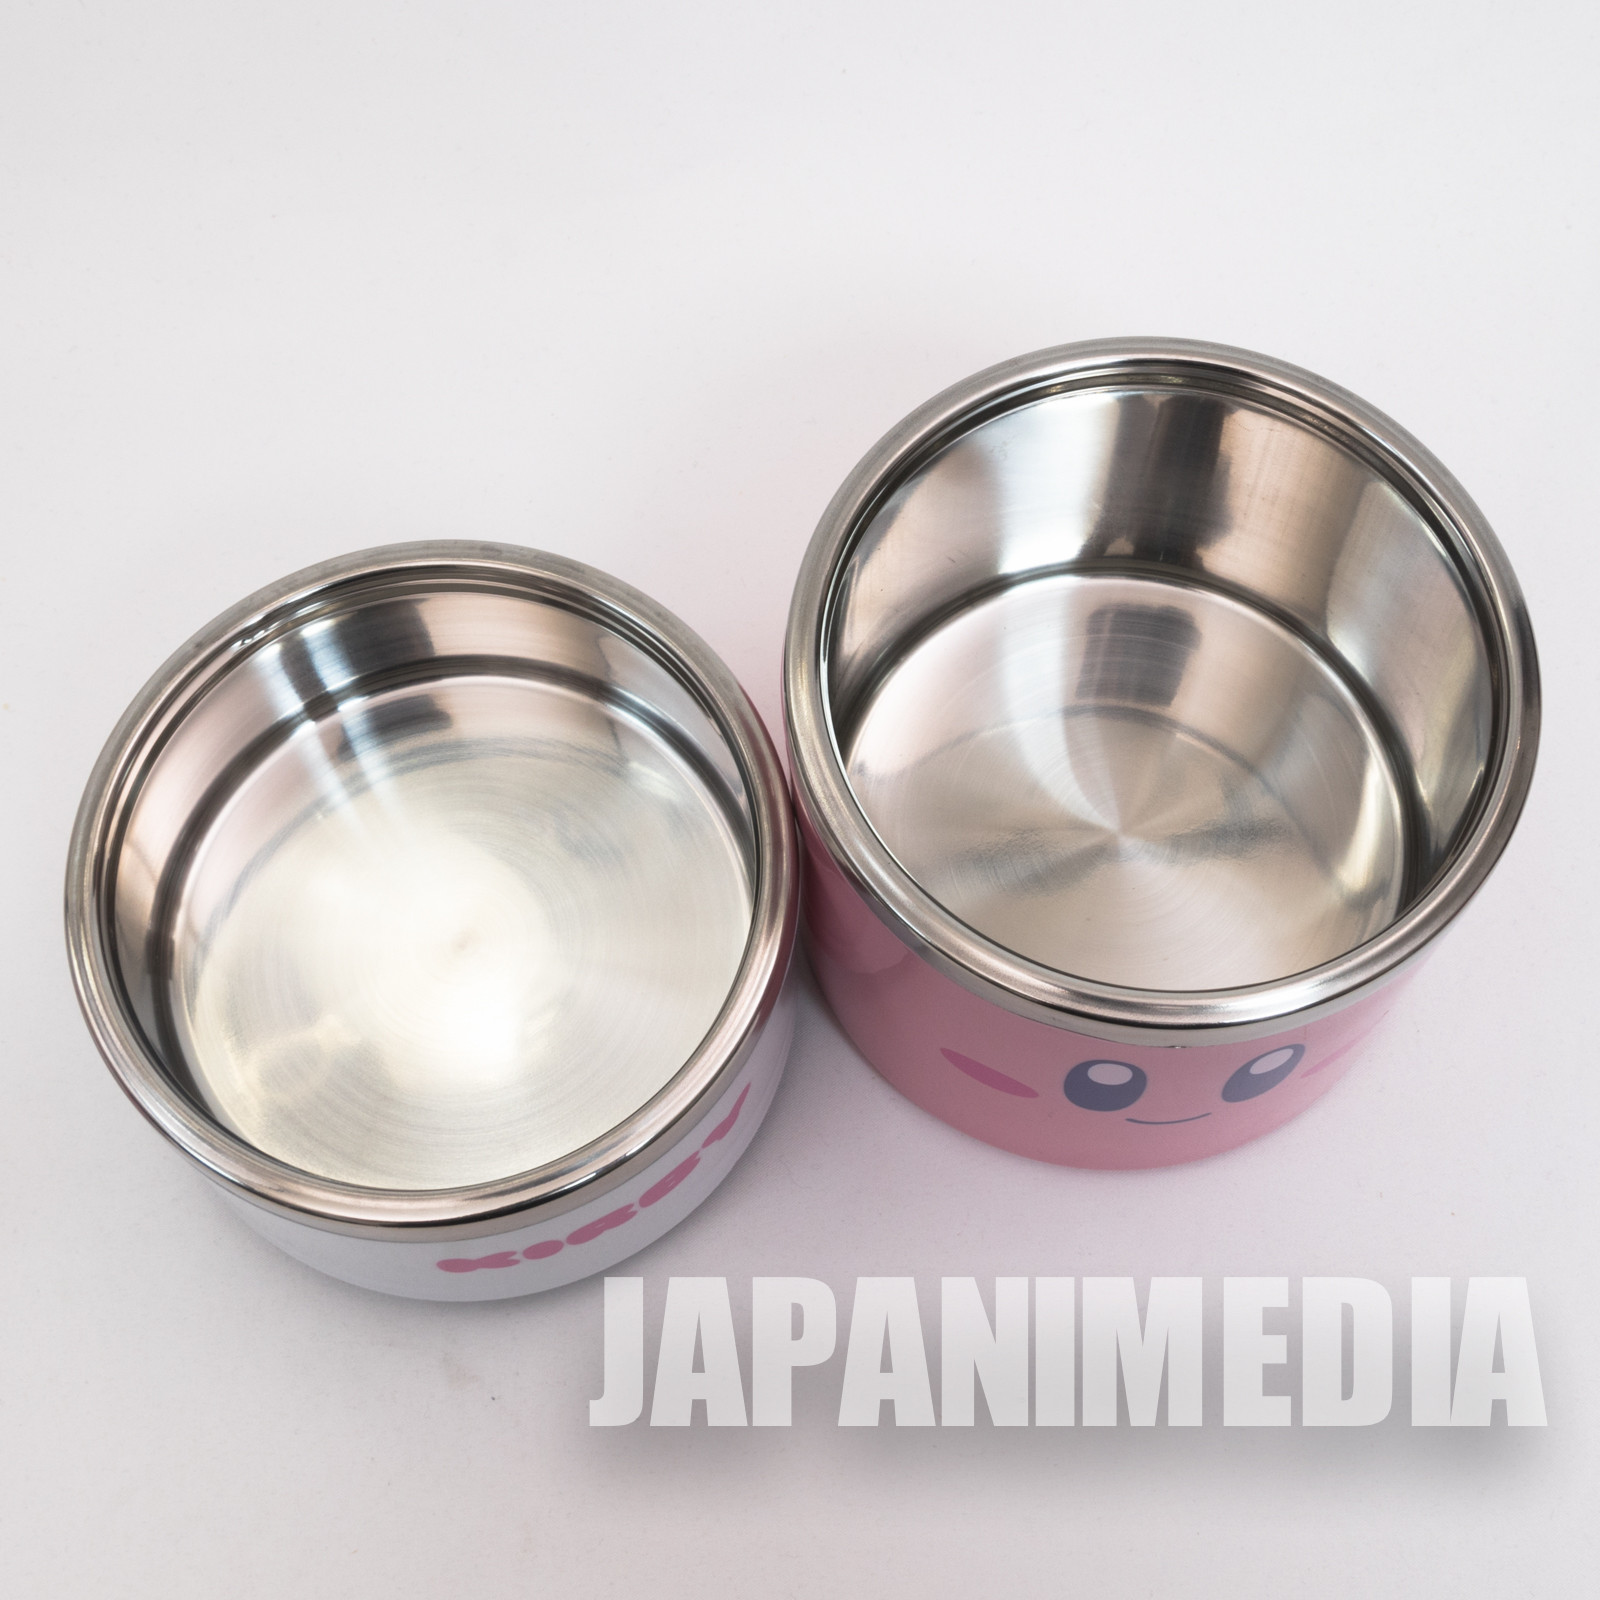 Muka Metal Tin Box Containers, Tin Box with Lids, Portable Small